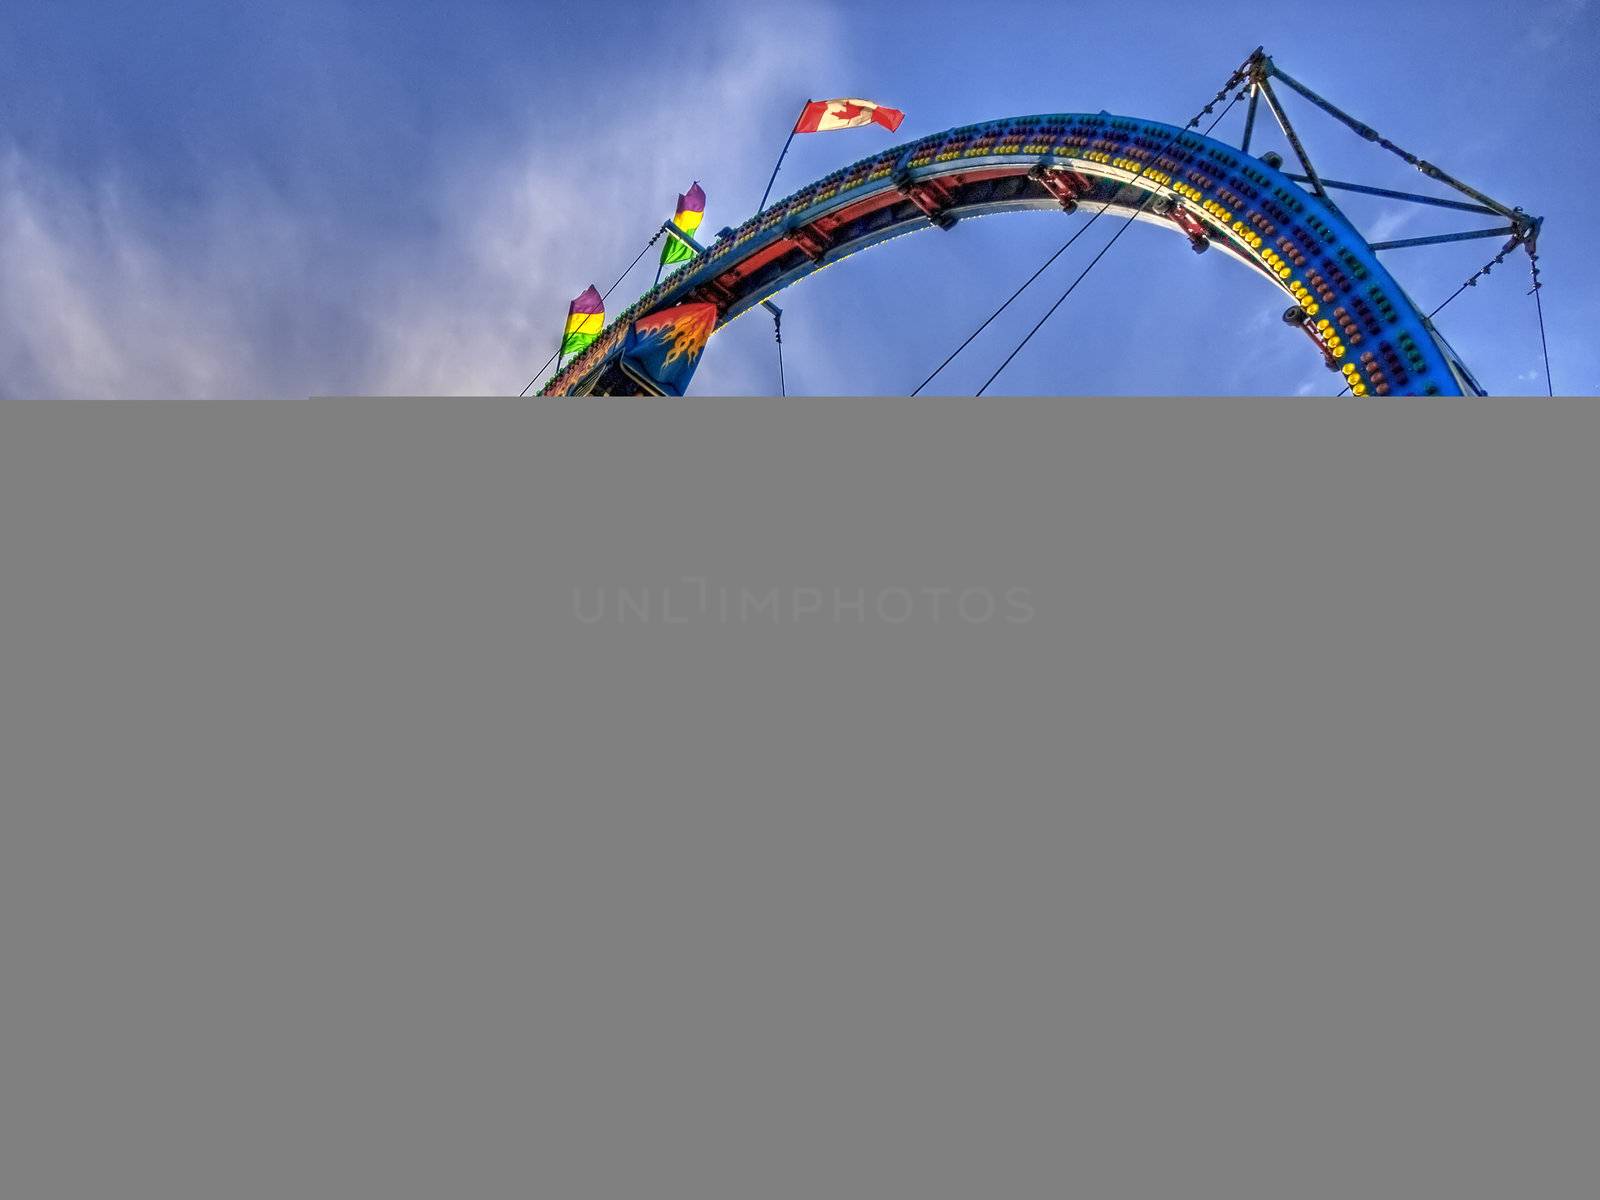 A rollercoaster loop at a fair in mid summer.